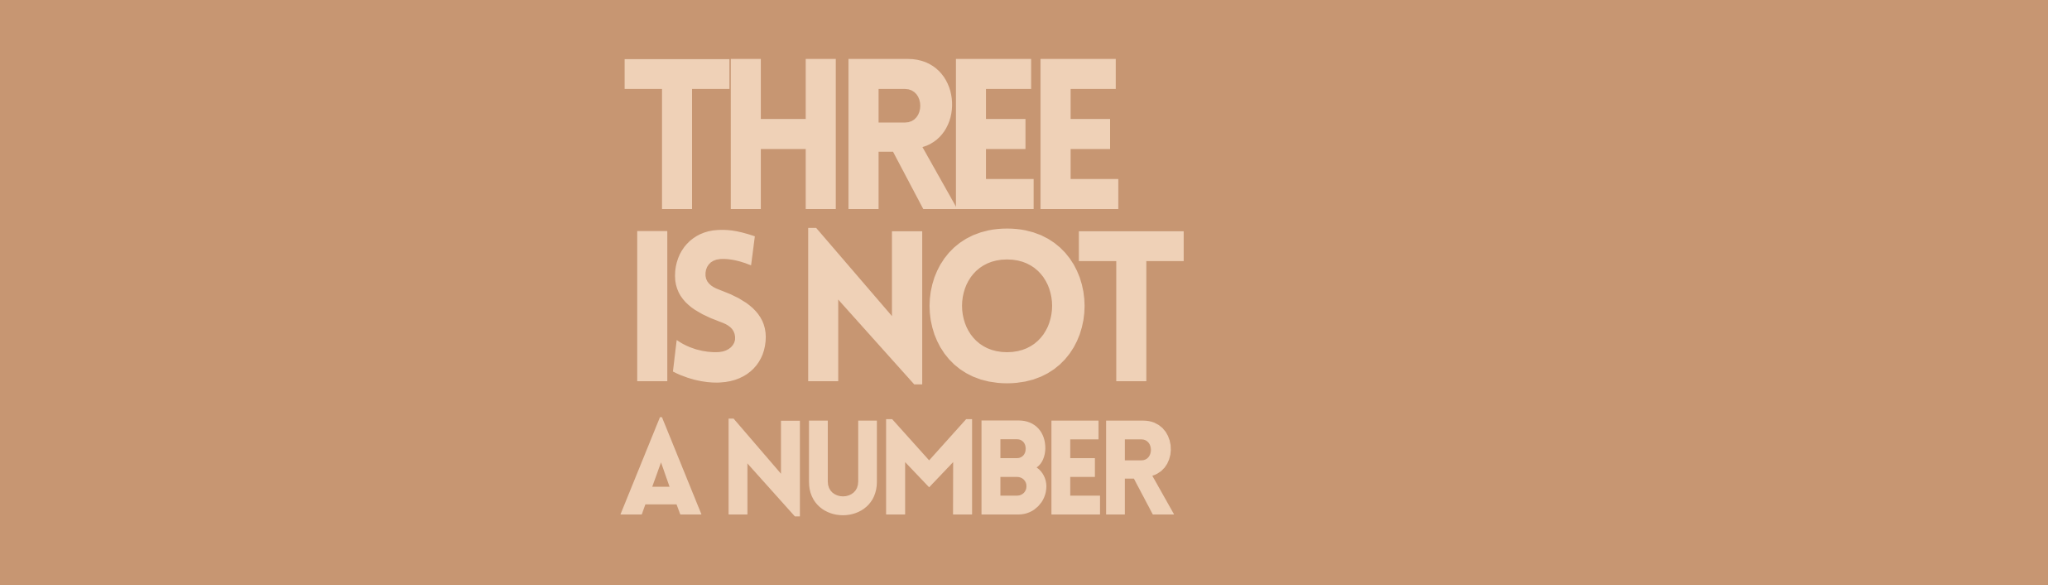 Three is not a number